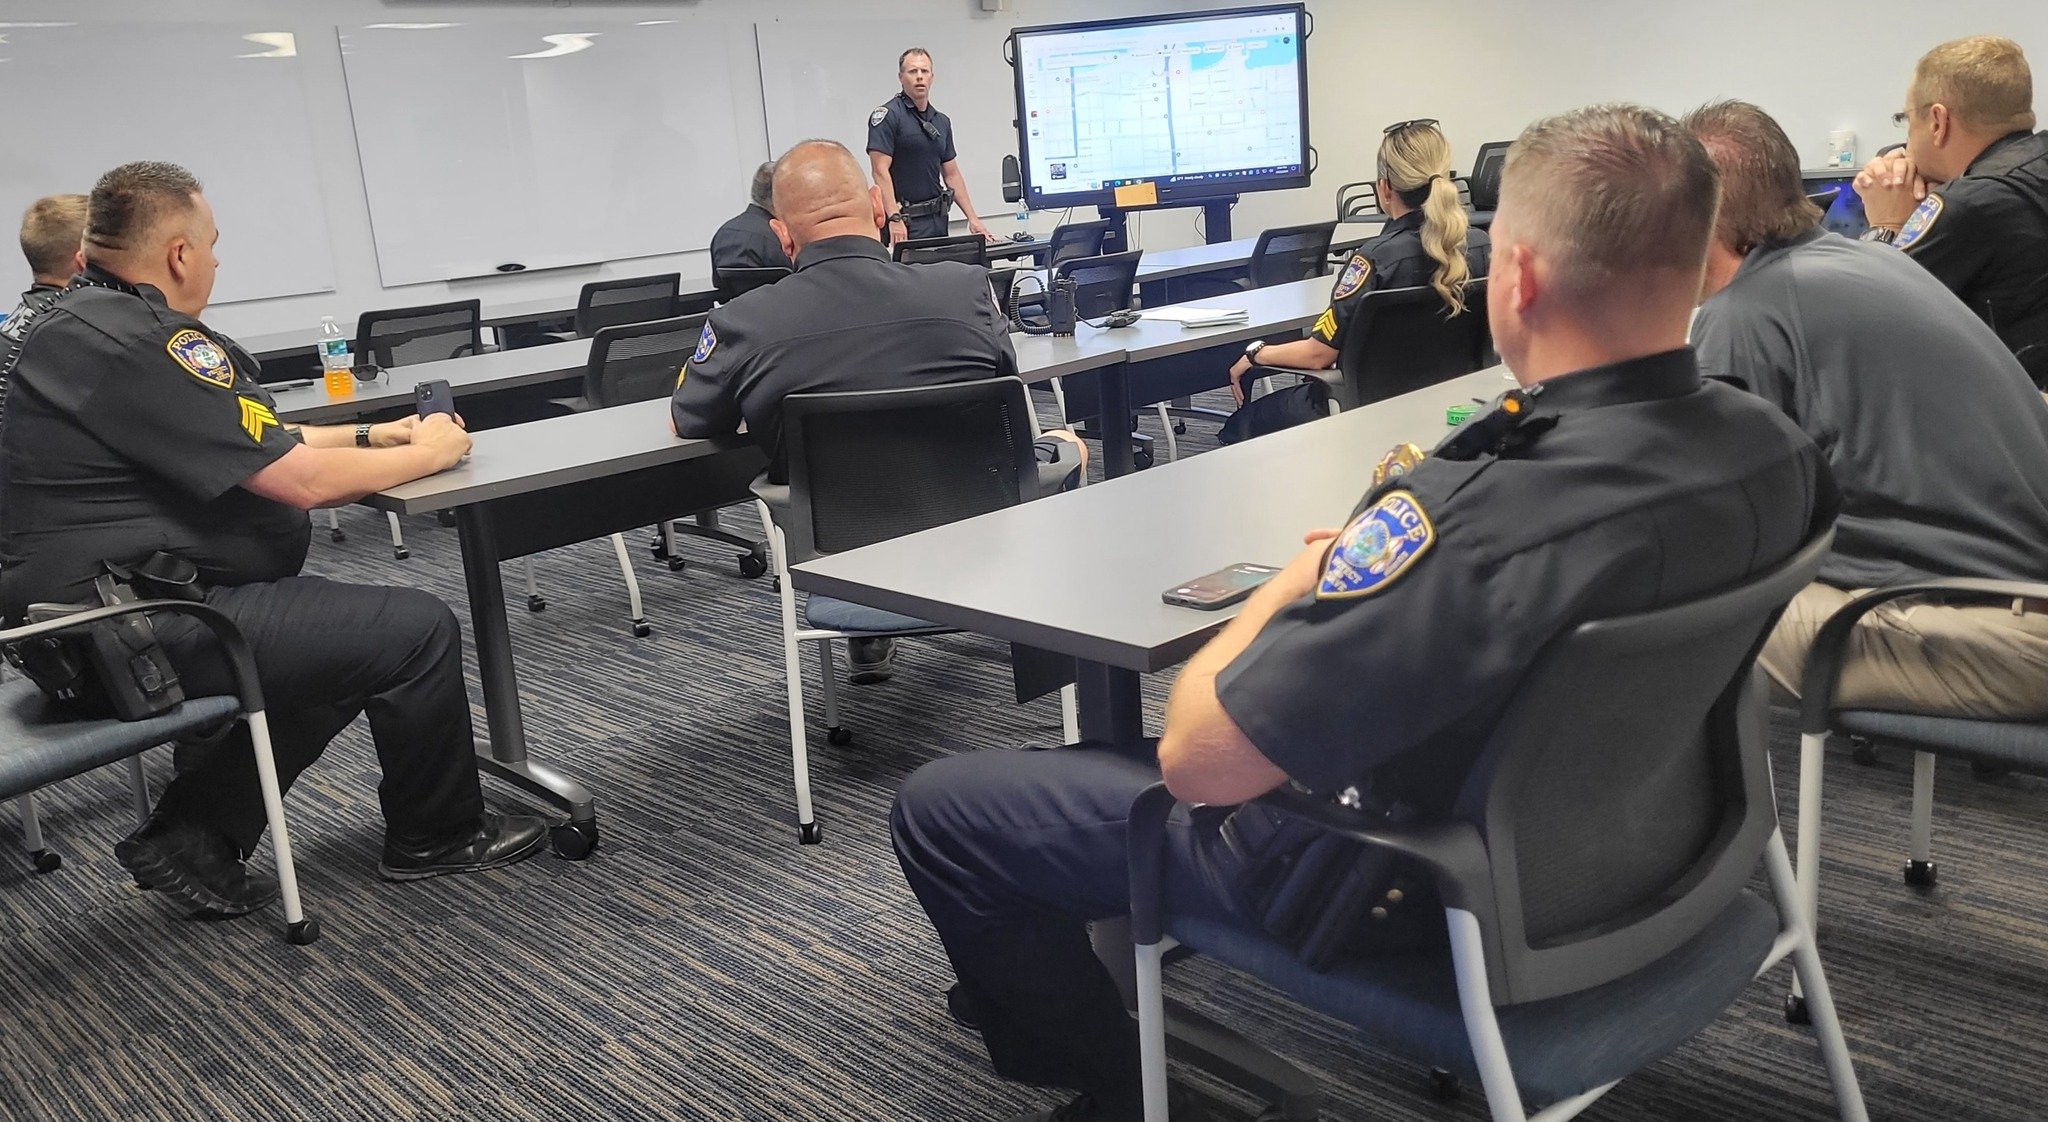 Command staff briefing just wrapped up before tonight's De Soto Grand Parade. The downtown block party begins at 4 p.m., and the parade steps off from the intersection of 14th St. W. and Manatee Ave. at approximately 7:30 p.m. The parade travels west